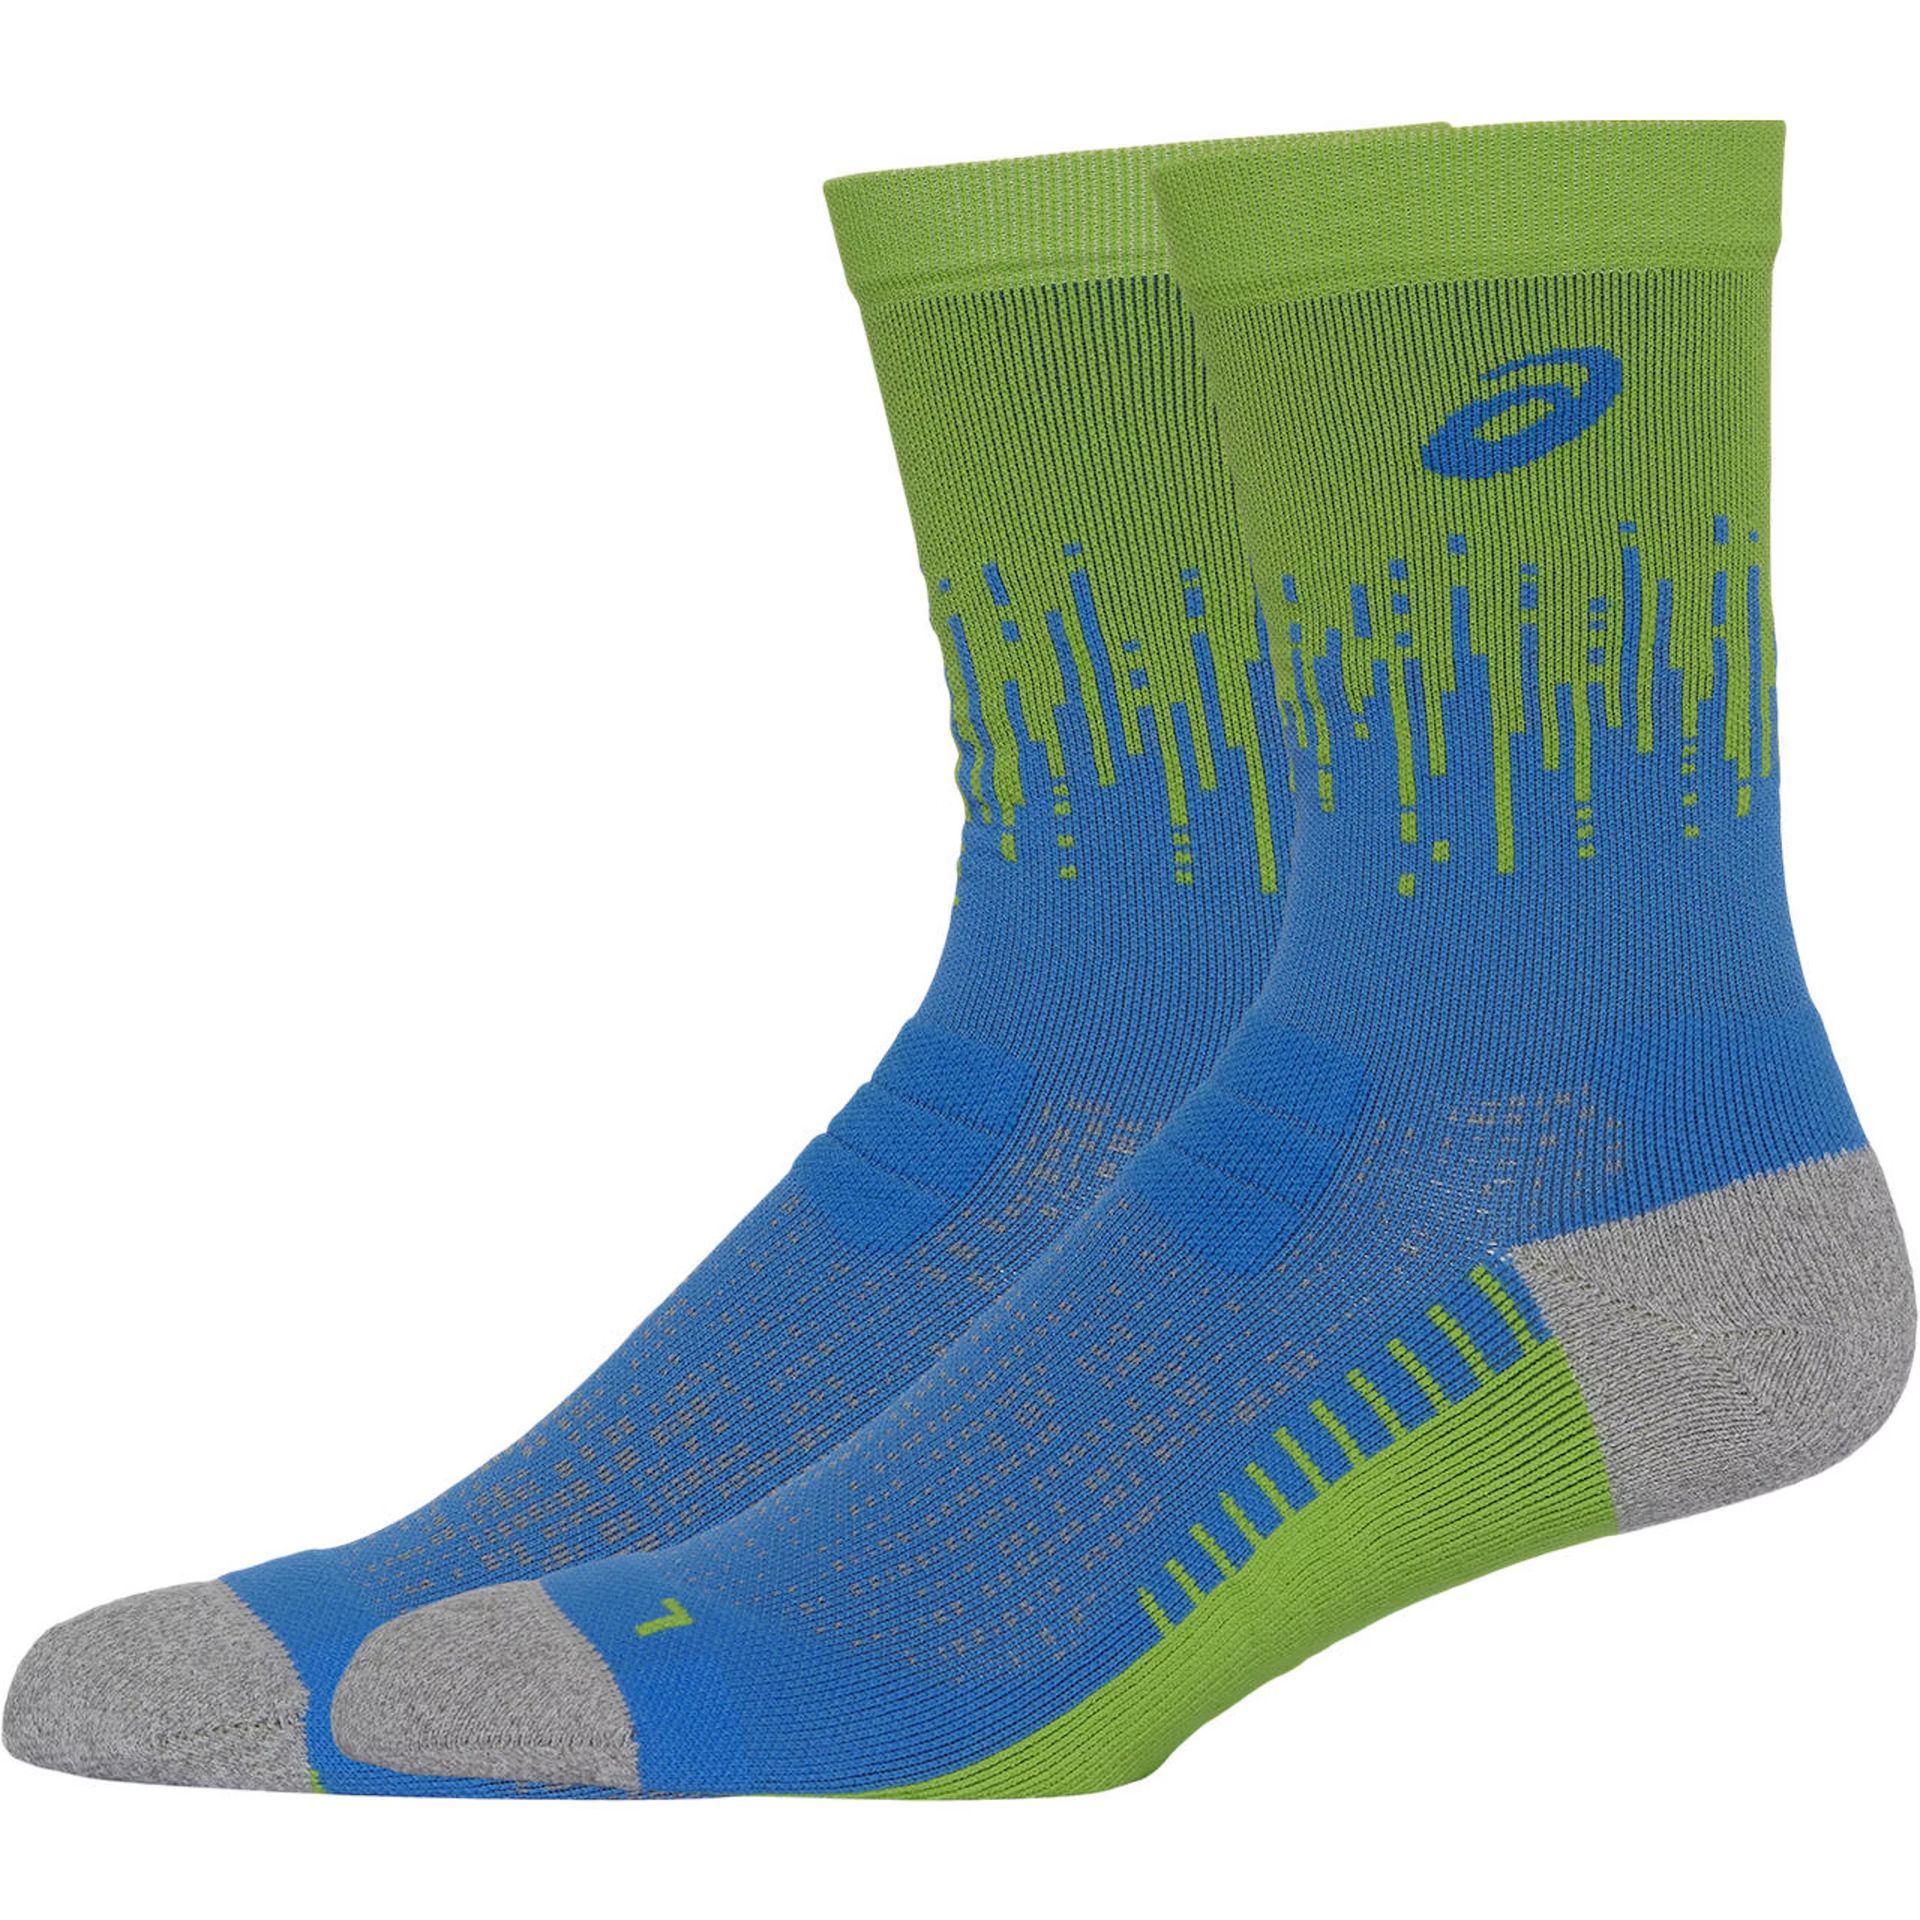 A pair of blue and green socks on a white background